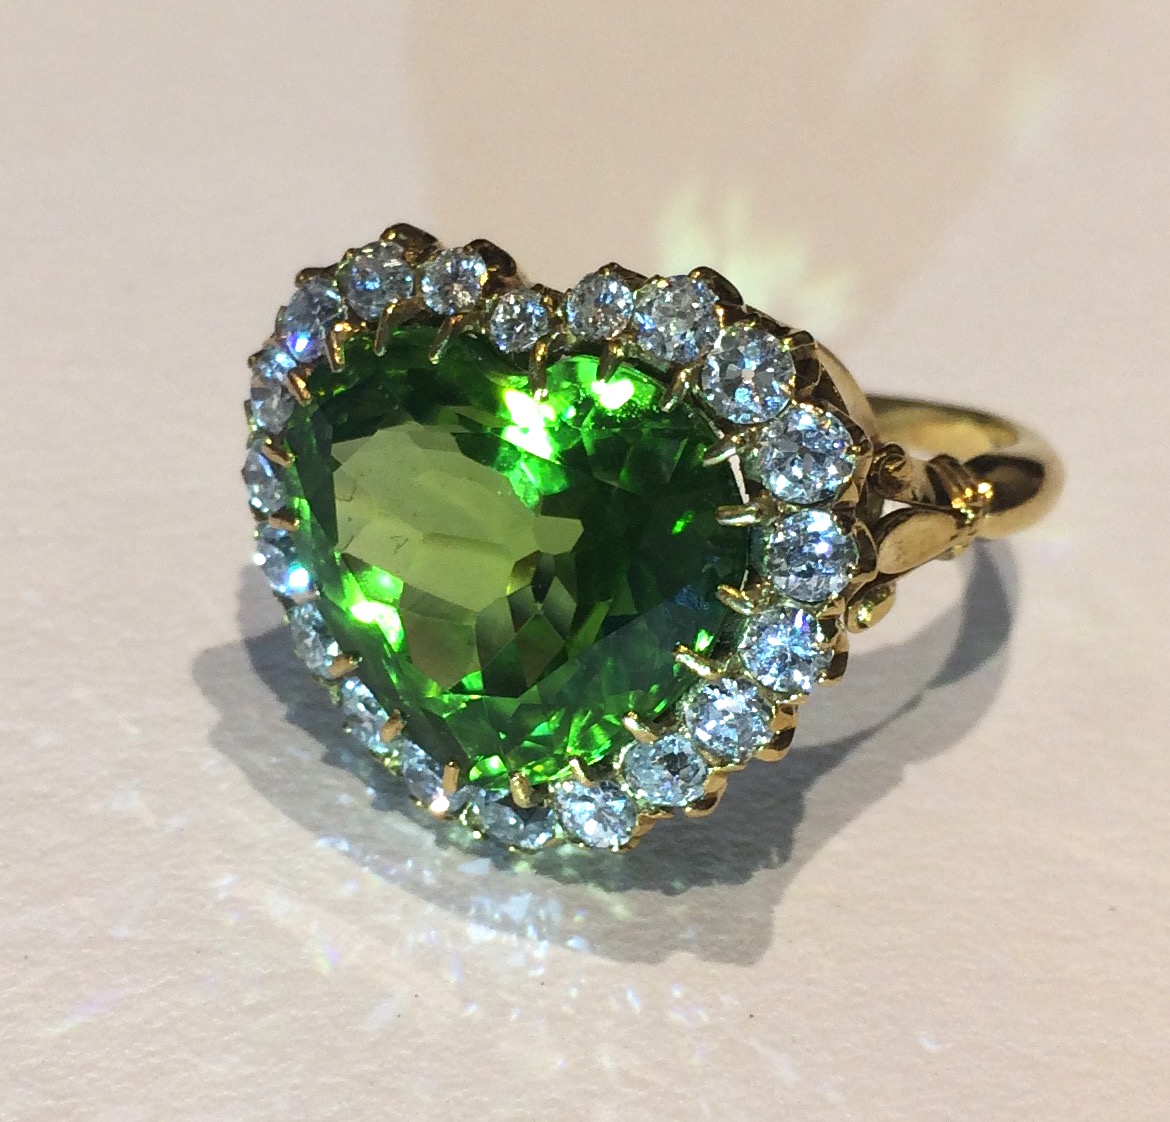 American Art Nouveau “Green Heart” ring set with a heart shaped peridot (approx.15 carats) surrounded with 20 round cut diamonds (approx. 3 ½ carats TW) all set in an 18K gold mounting, c.1900